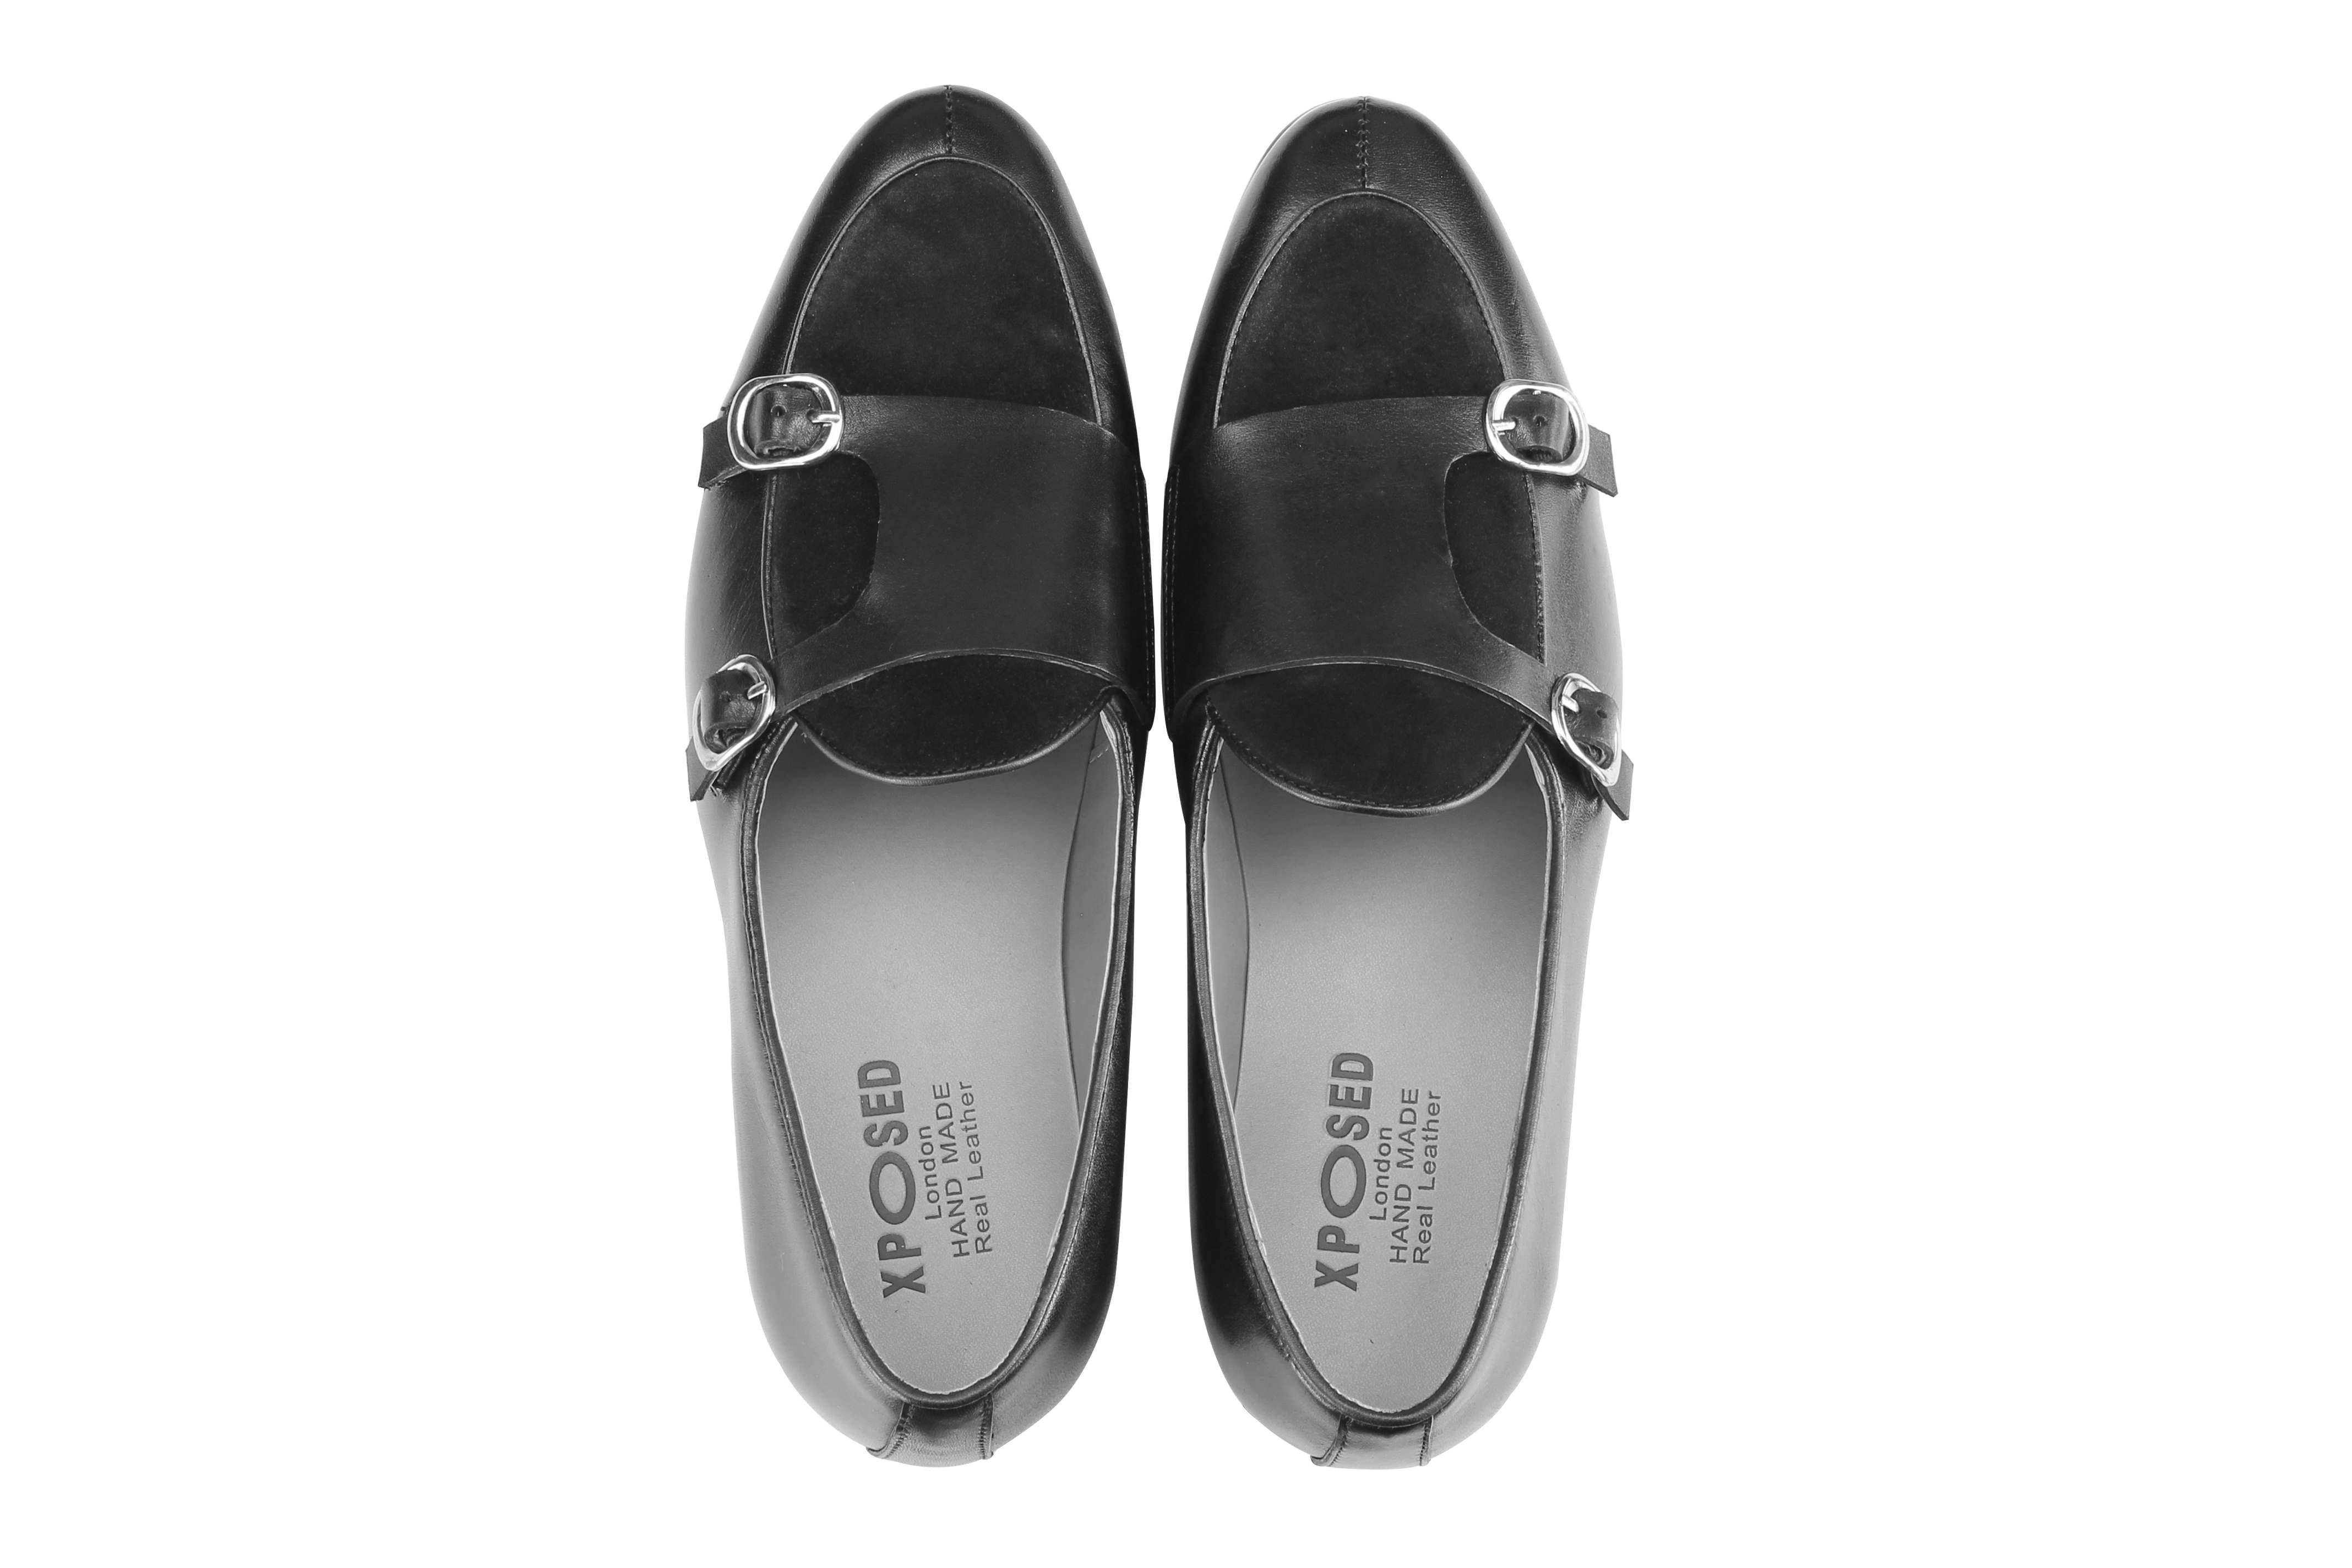 Real Leather Double Monk Strap Black Loafers